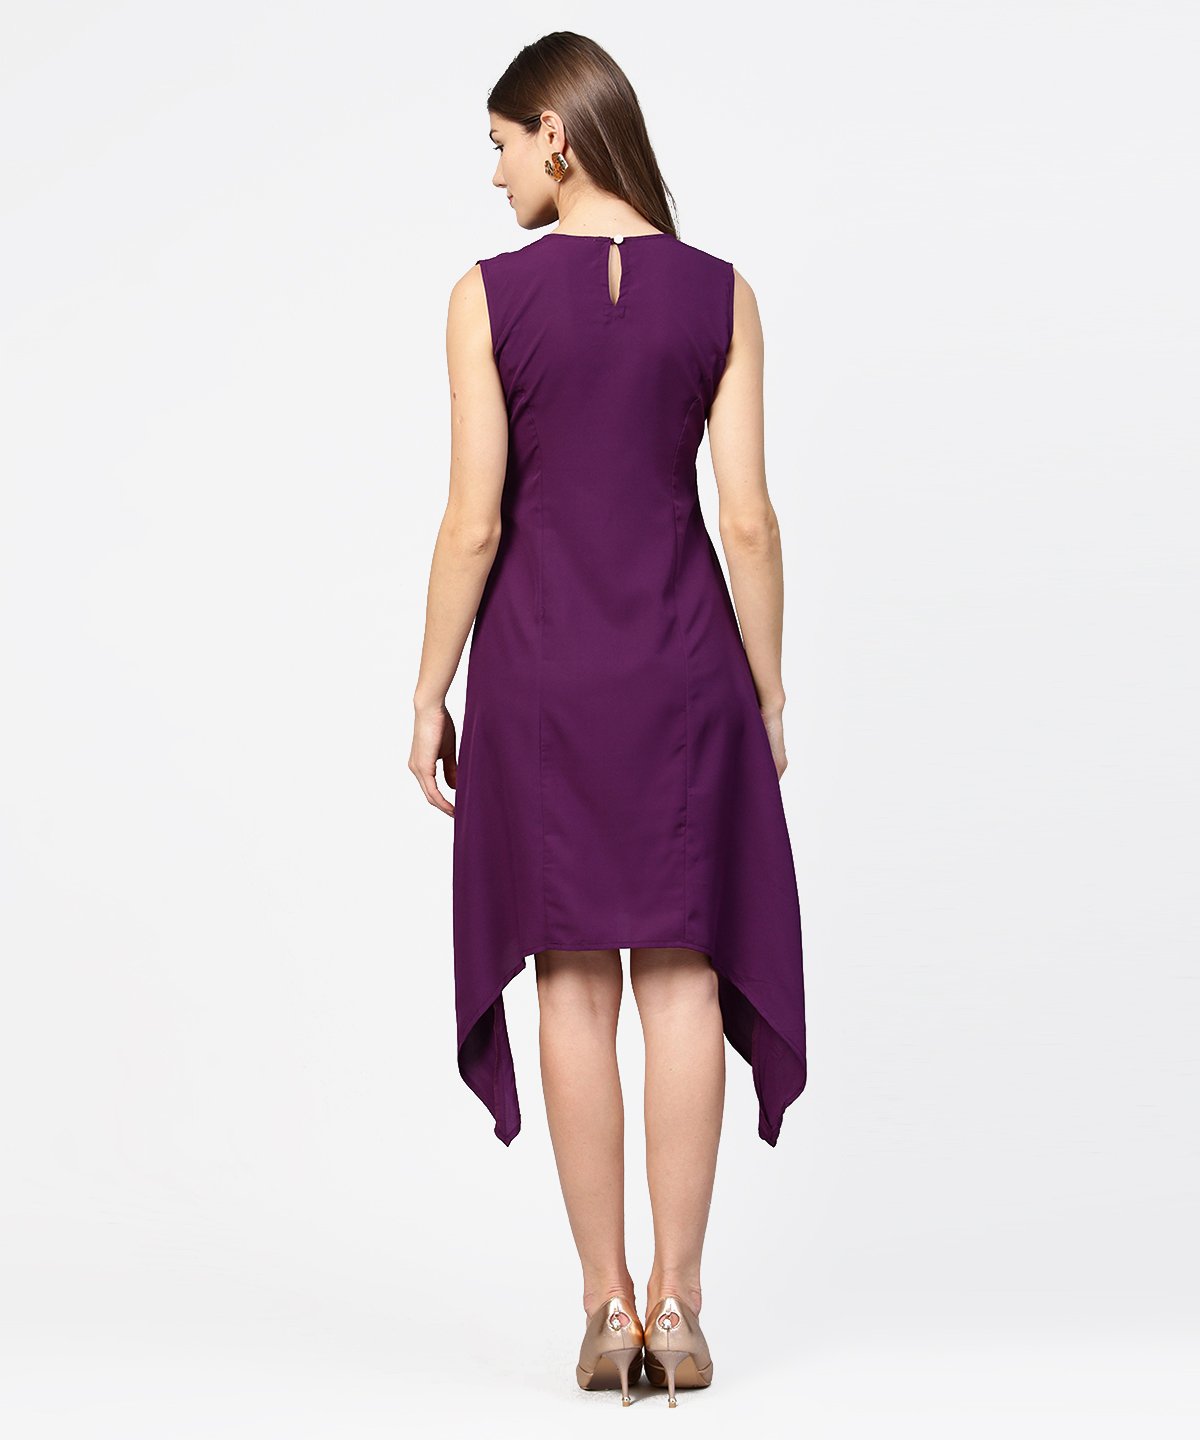 Women's Purple Sleeveless A-Line Dress With Piping Work - Nayo Clothing